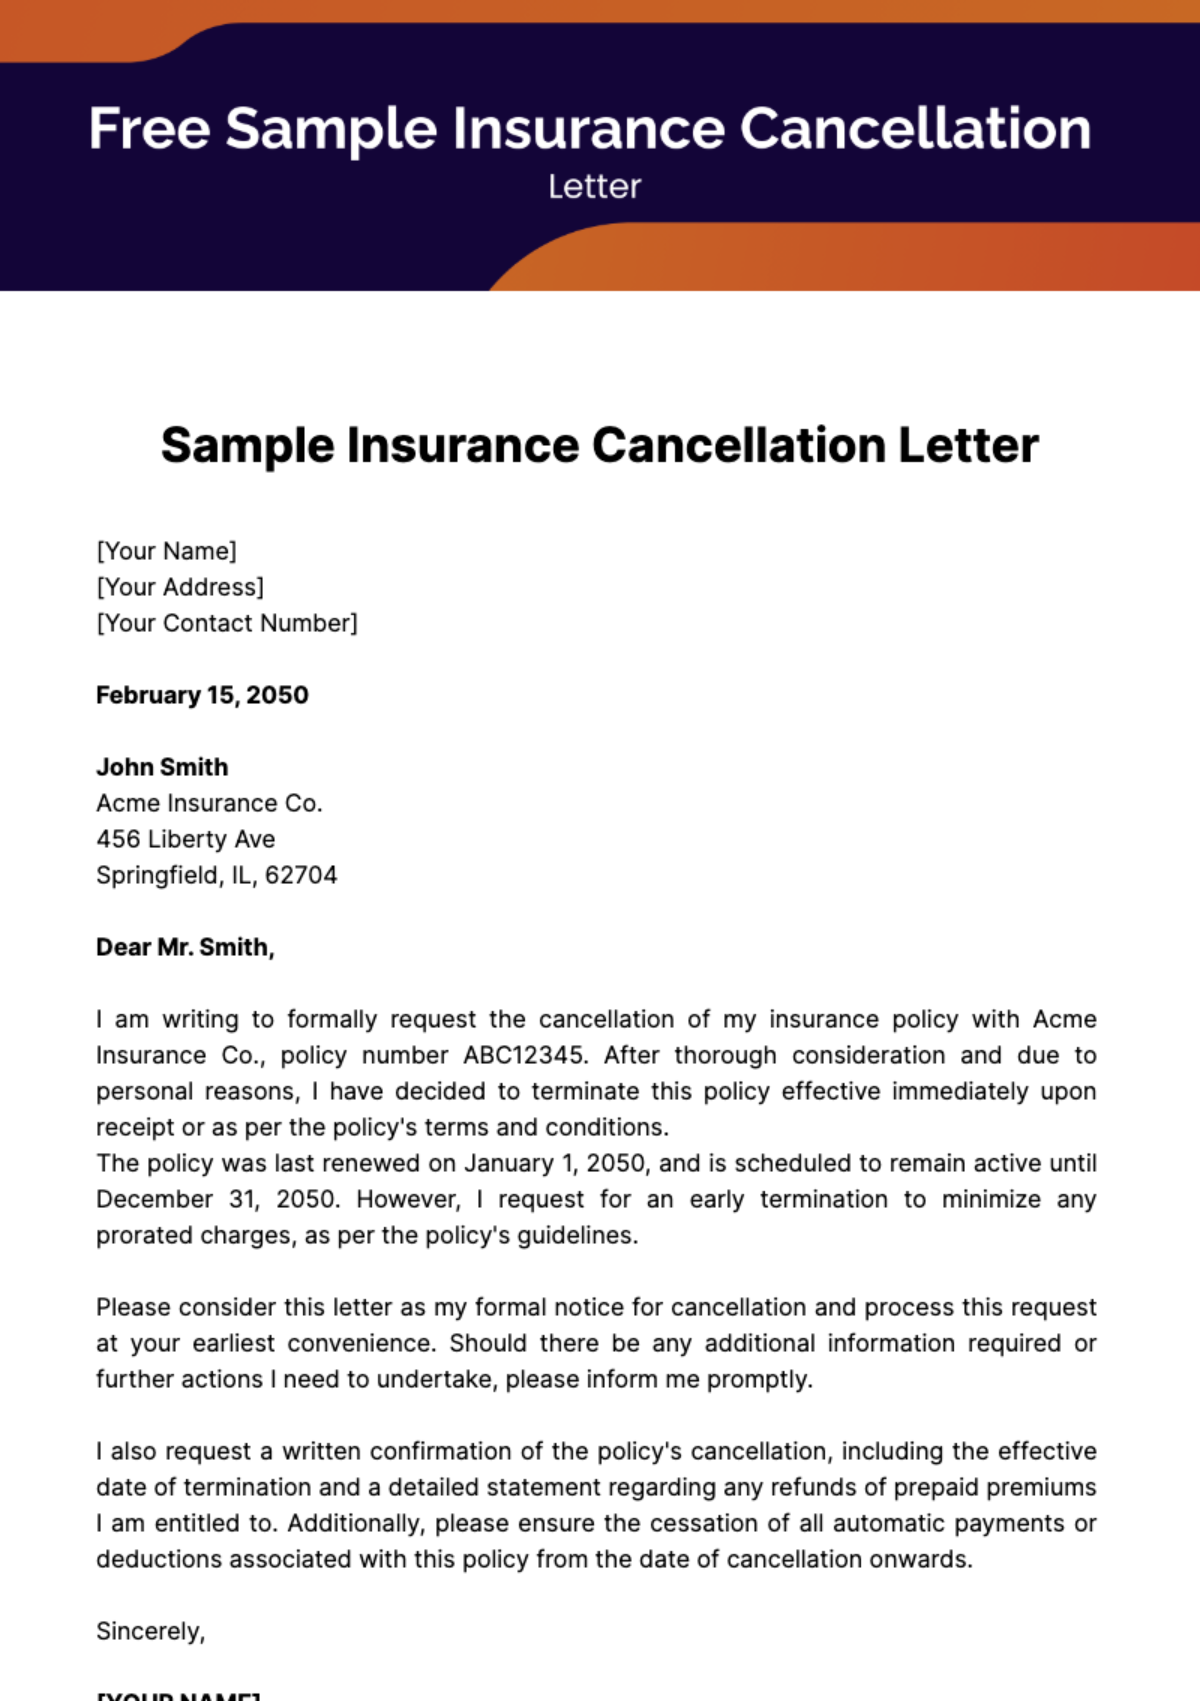 Free Sample Insurance Cancellation Letter Template